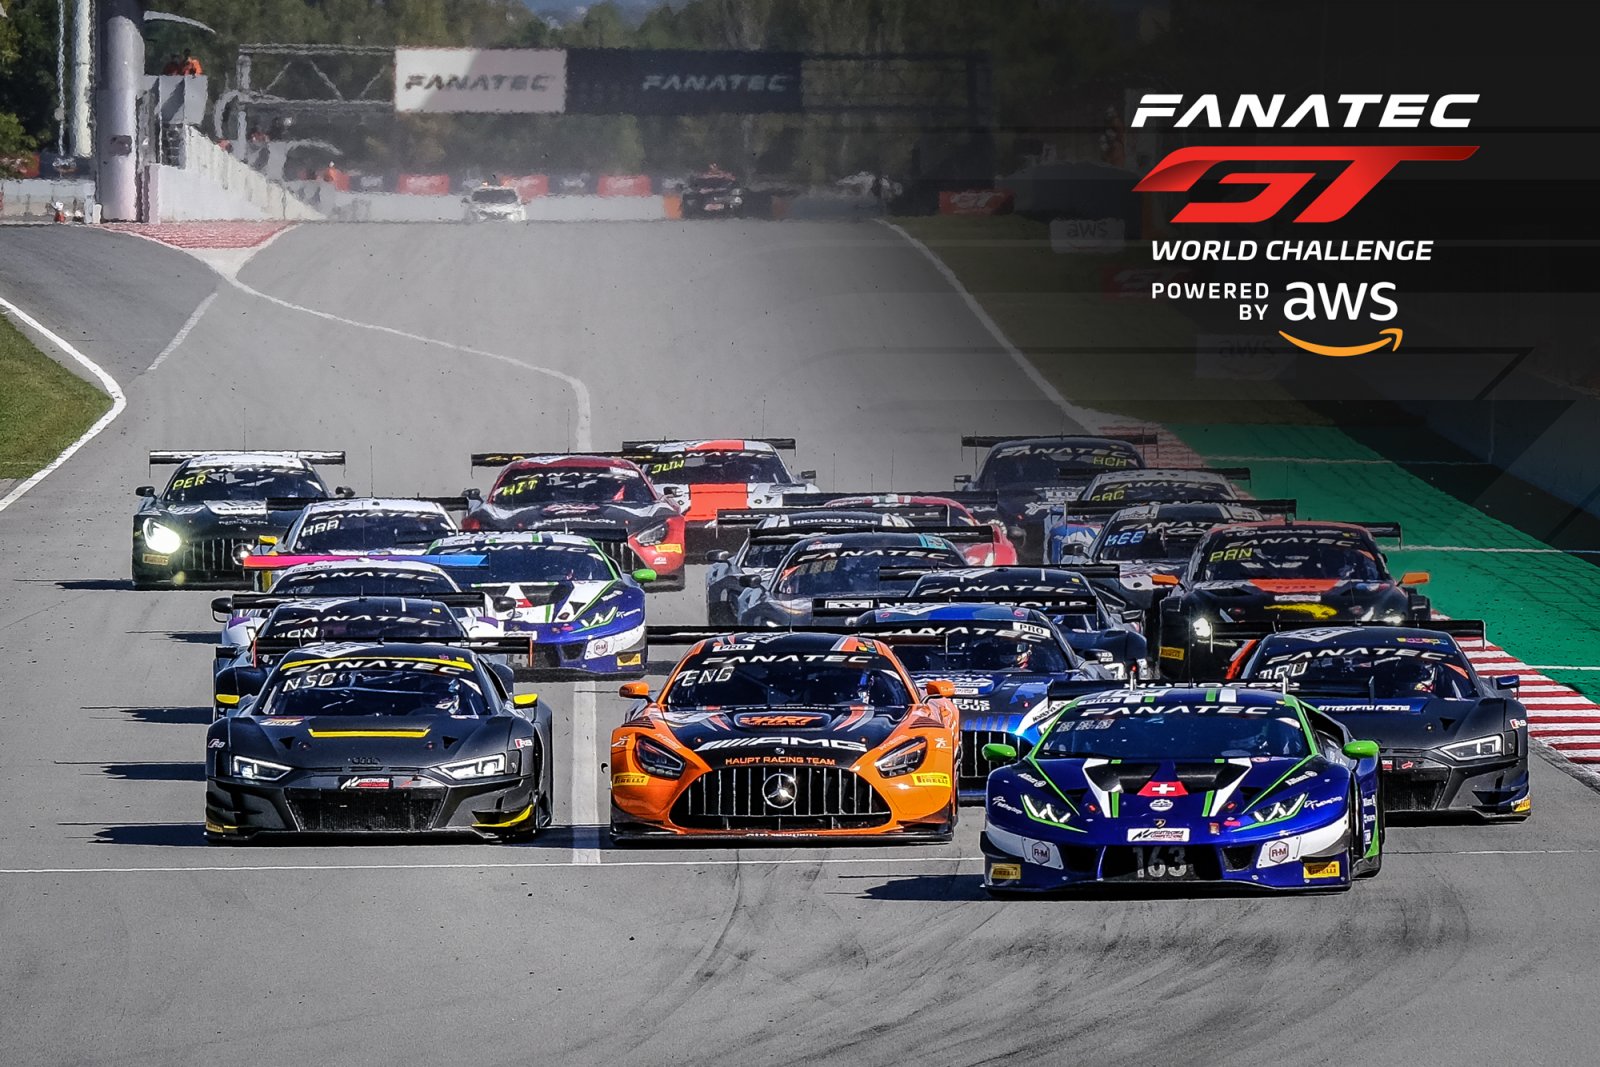 Fanatec named title sponsor of GT World Challenge Powered by AWS and GT2 European Series 